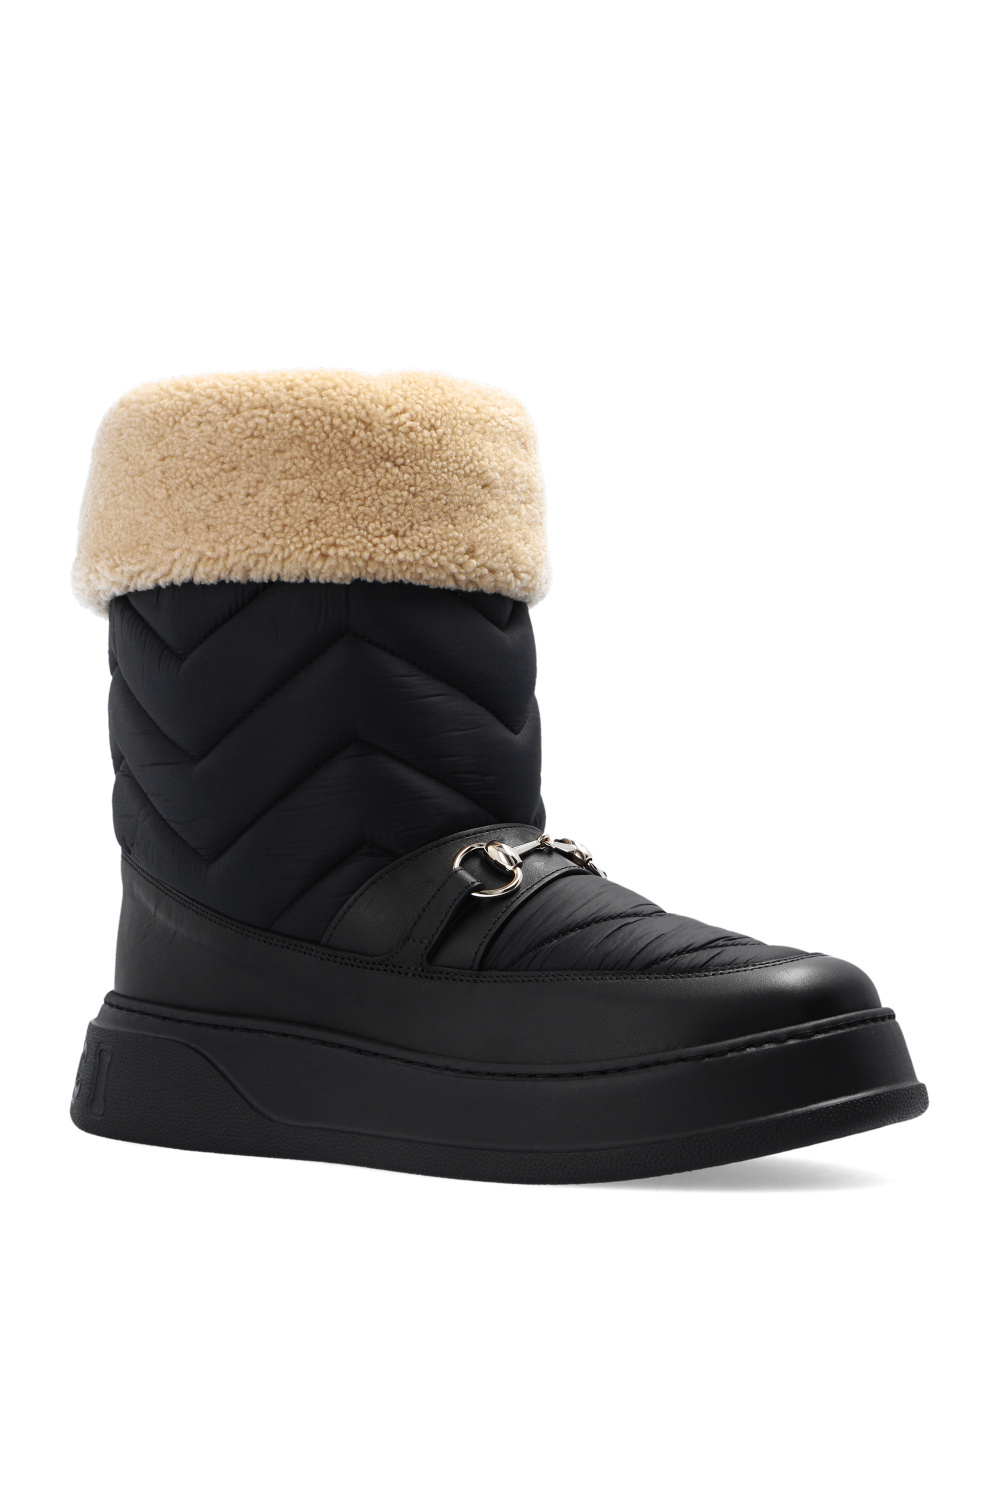 Gucci GUCCI MERINO WOOL-TRIMMED ANKLE BOOTS